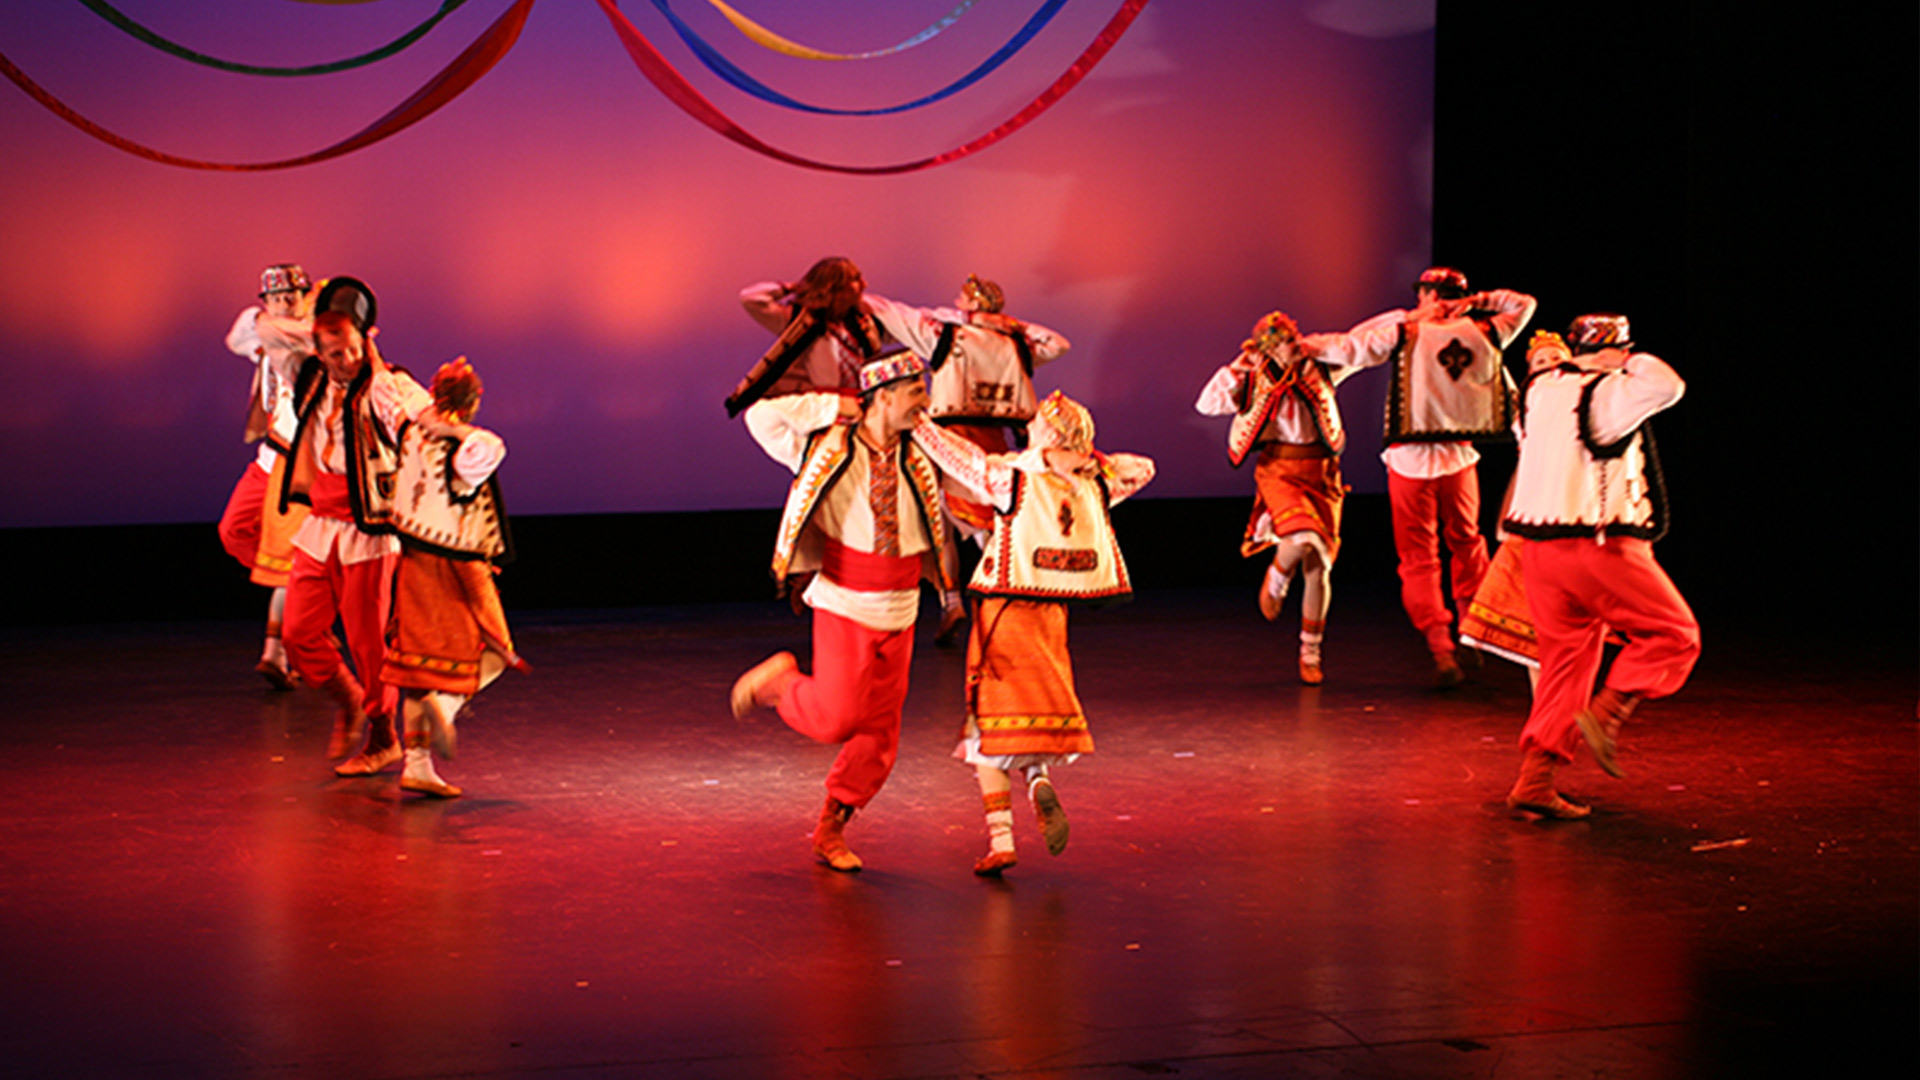 dancers perform on stage in pairs